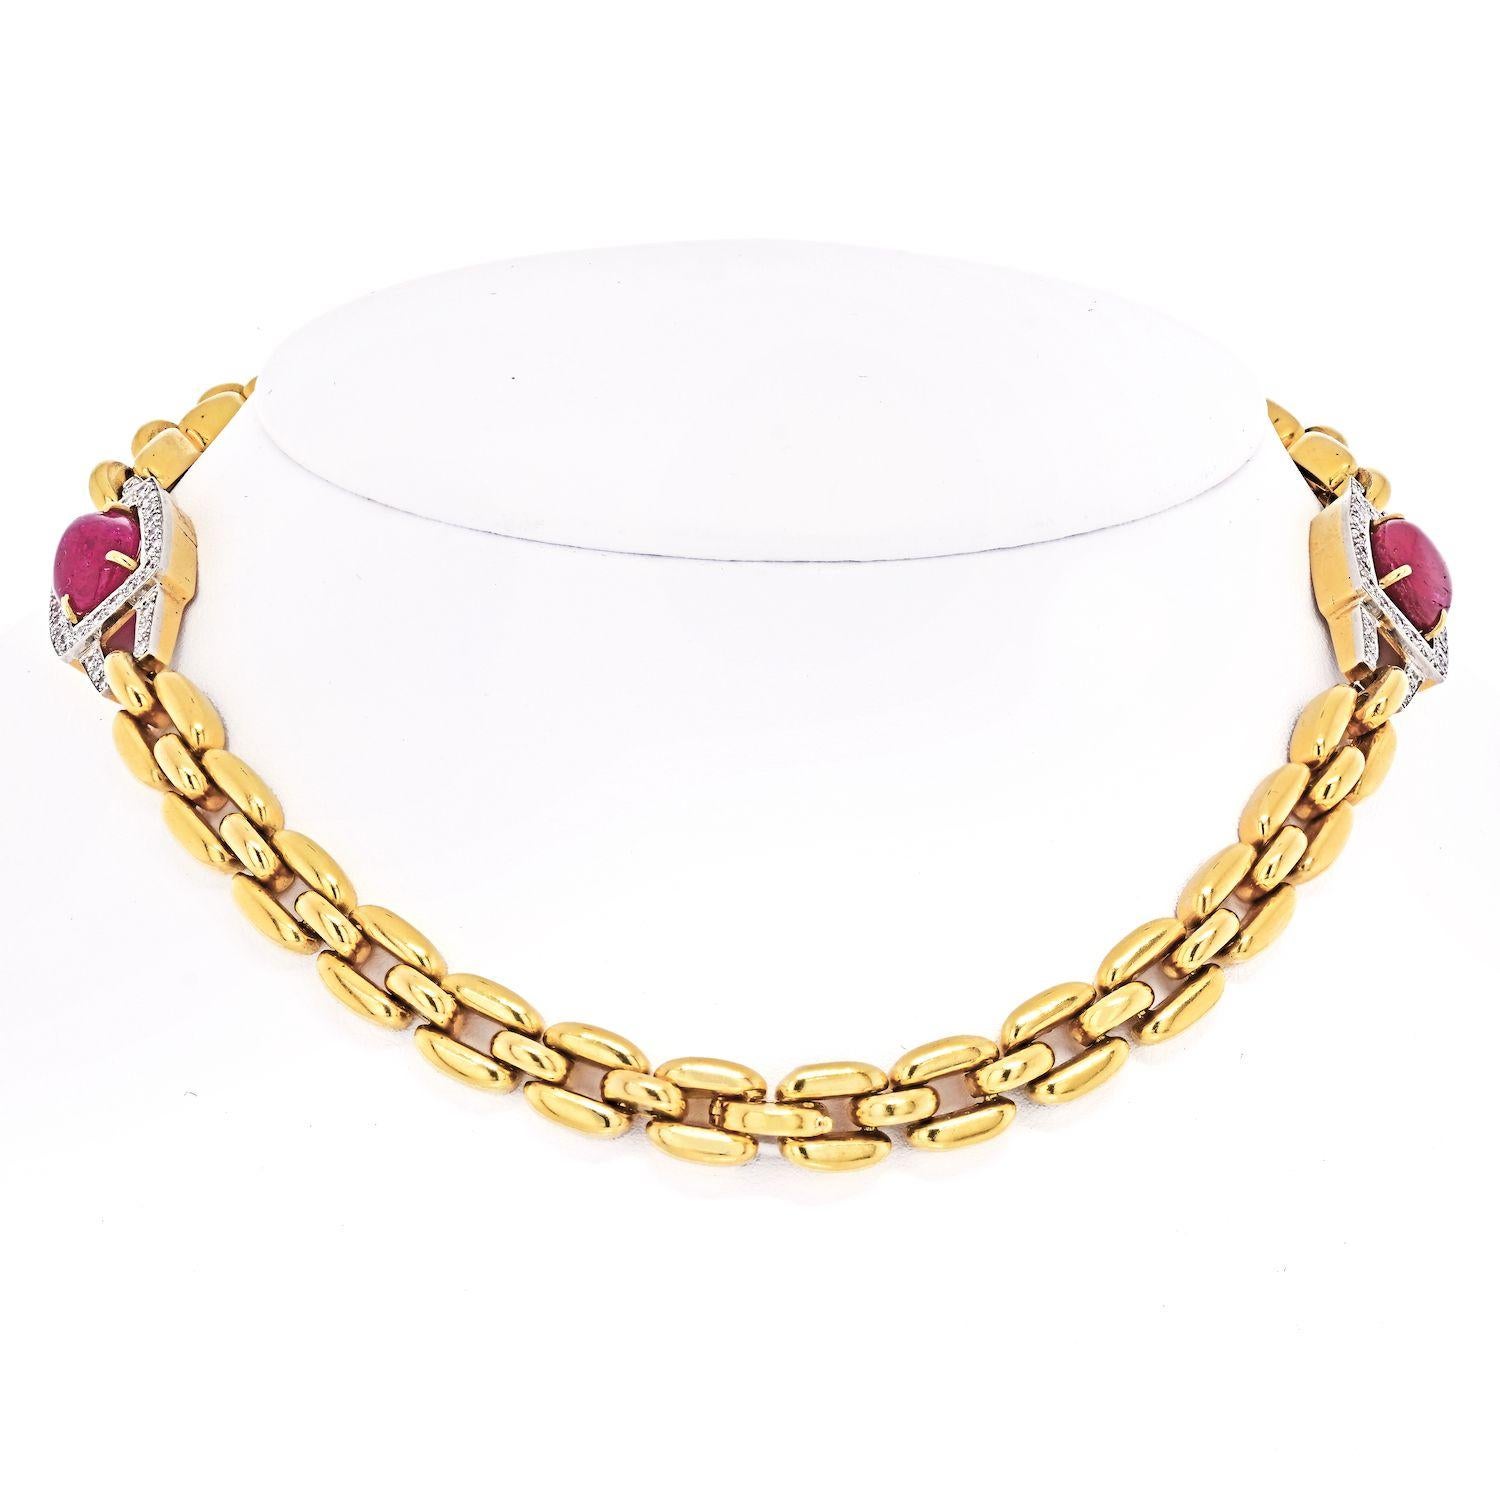 Bold yet elegant necklace created by David Webb in the 1970s. Features two cabochon rubies accented with round diamonds set in yellow gold.
The necklace comes apart and turns into two bracelets. The bracelets are 7.25